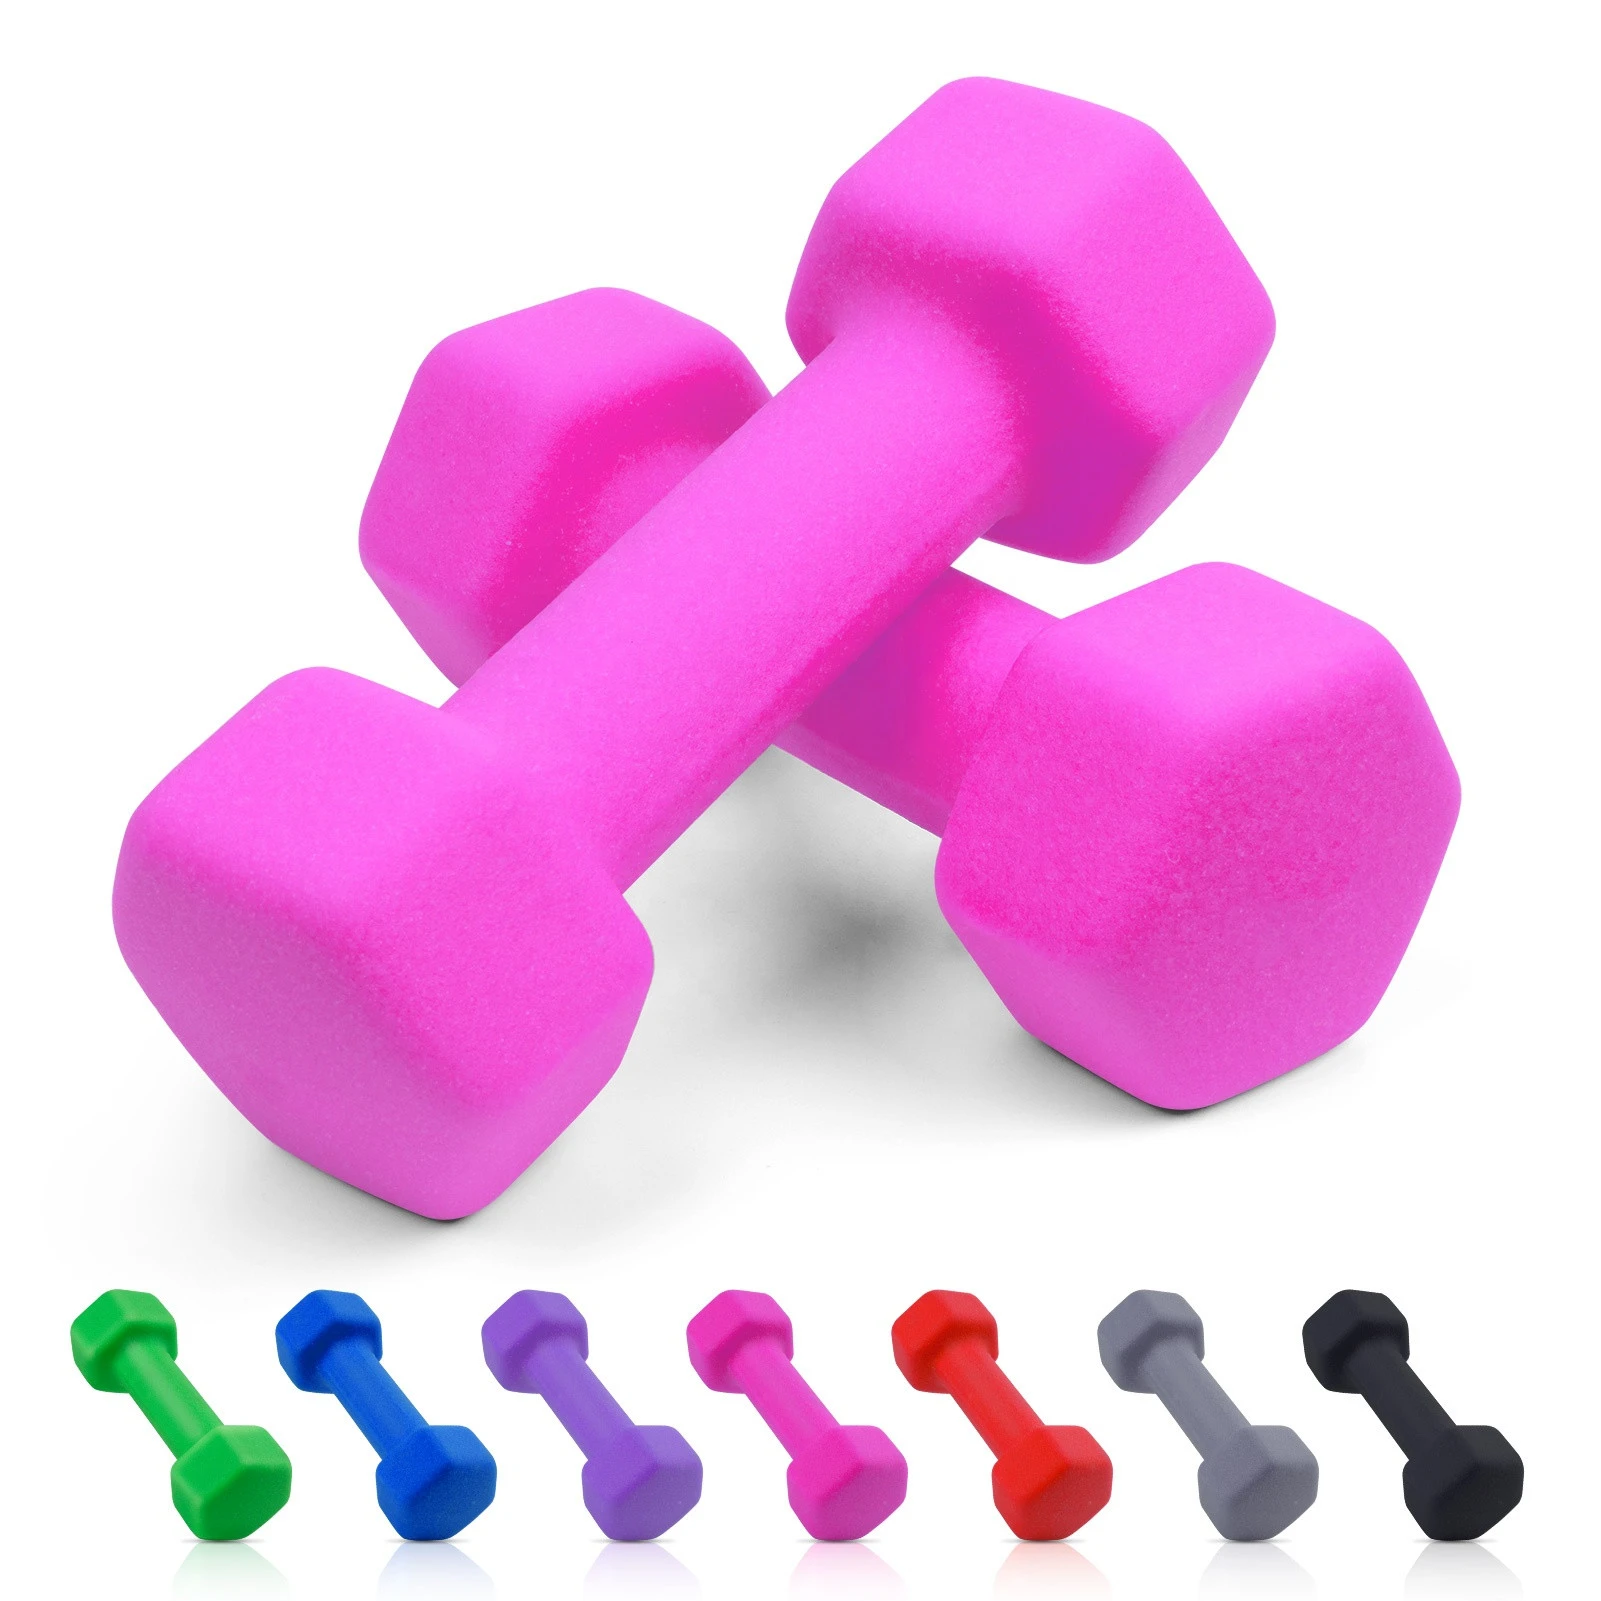 Wholesale Dumbbell Weight Set Gym Equipment Colorful Yoga Small Sports Dumbbells